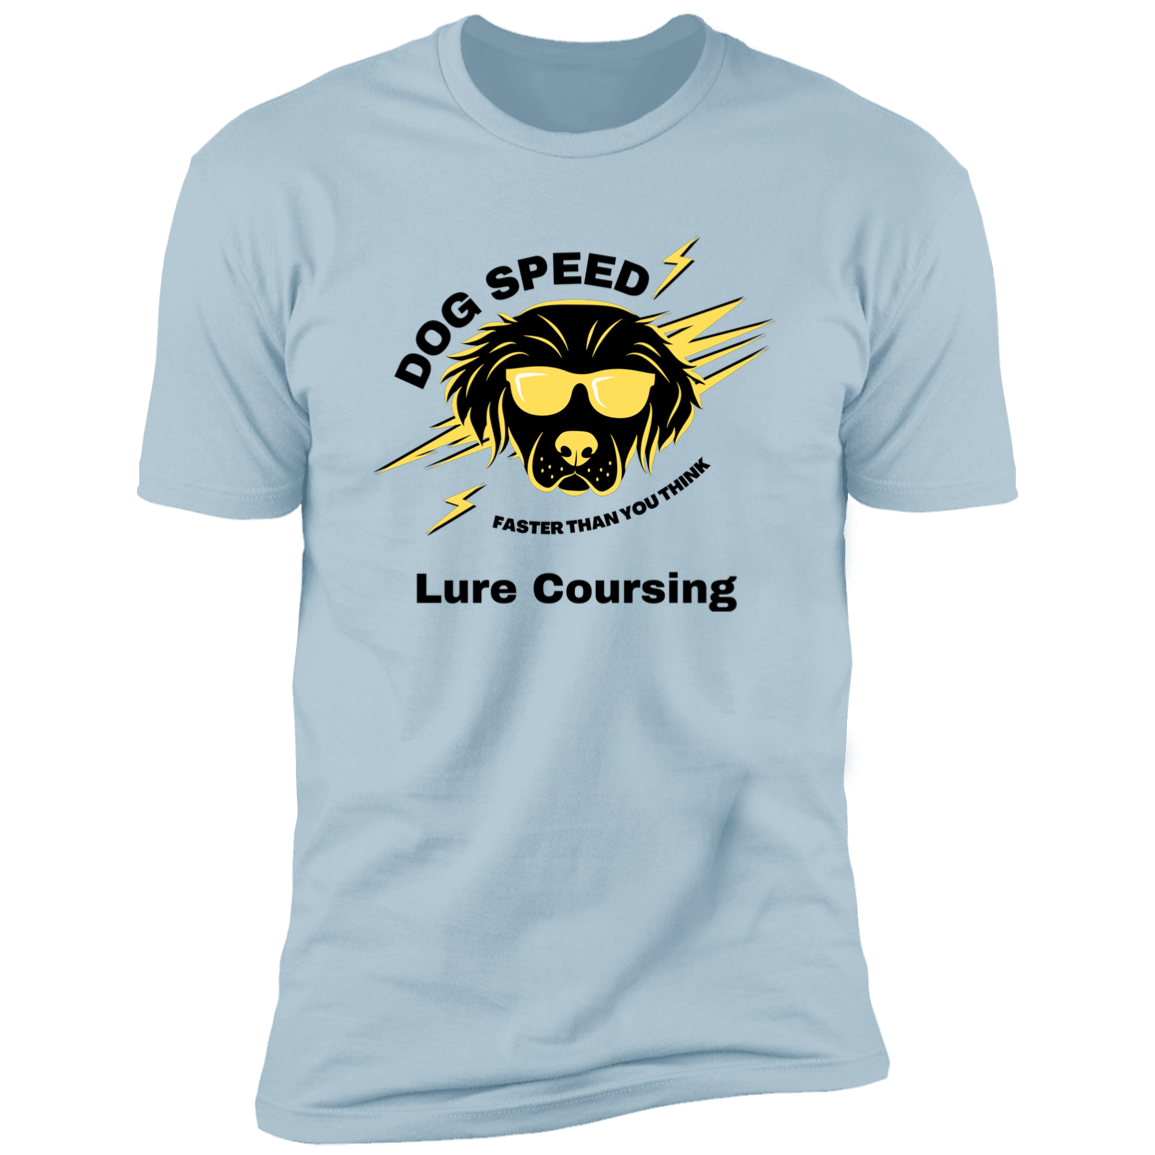 Dog Speed Faster Than You Think Lure Coursing T-shirt, Lure Coursing shirt dog shirt for humans, in light blue